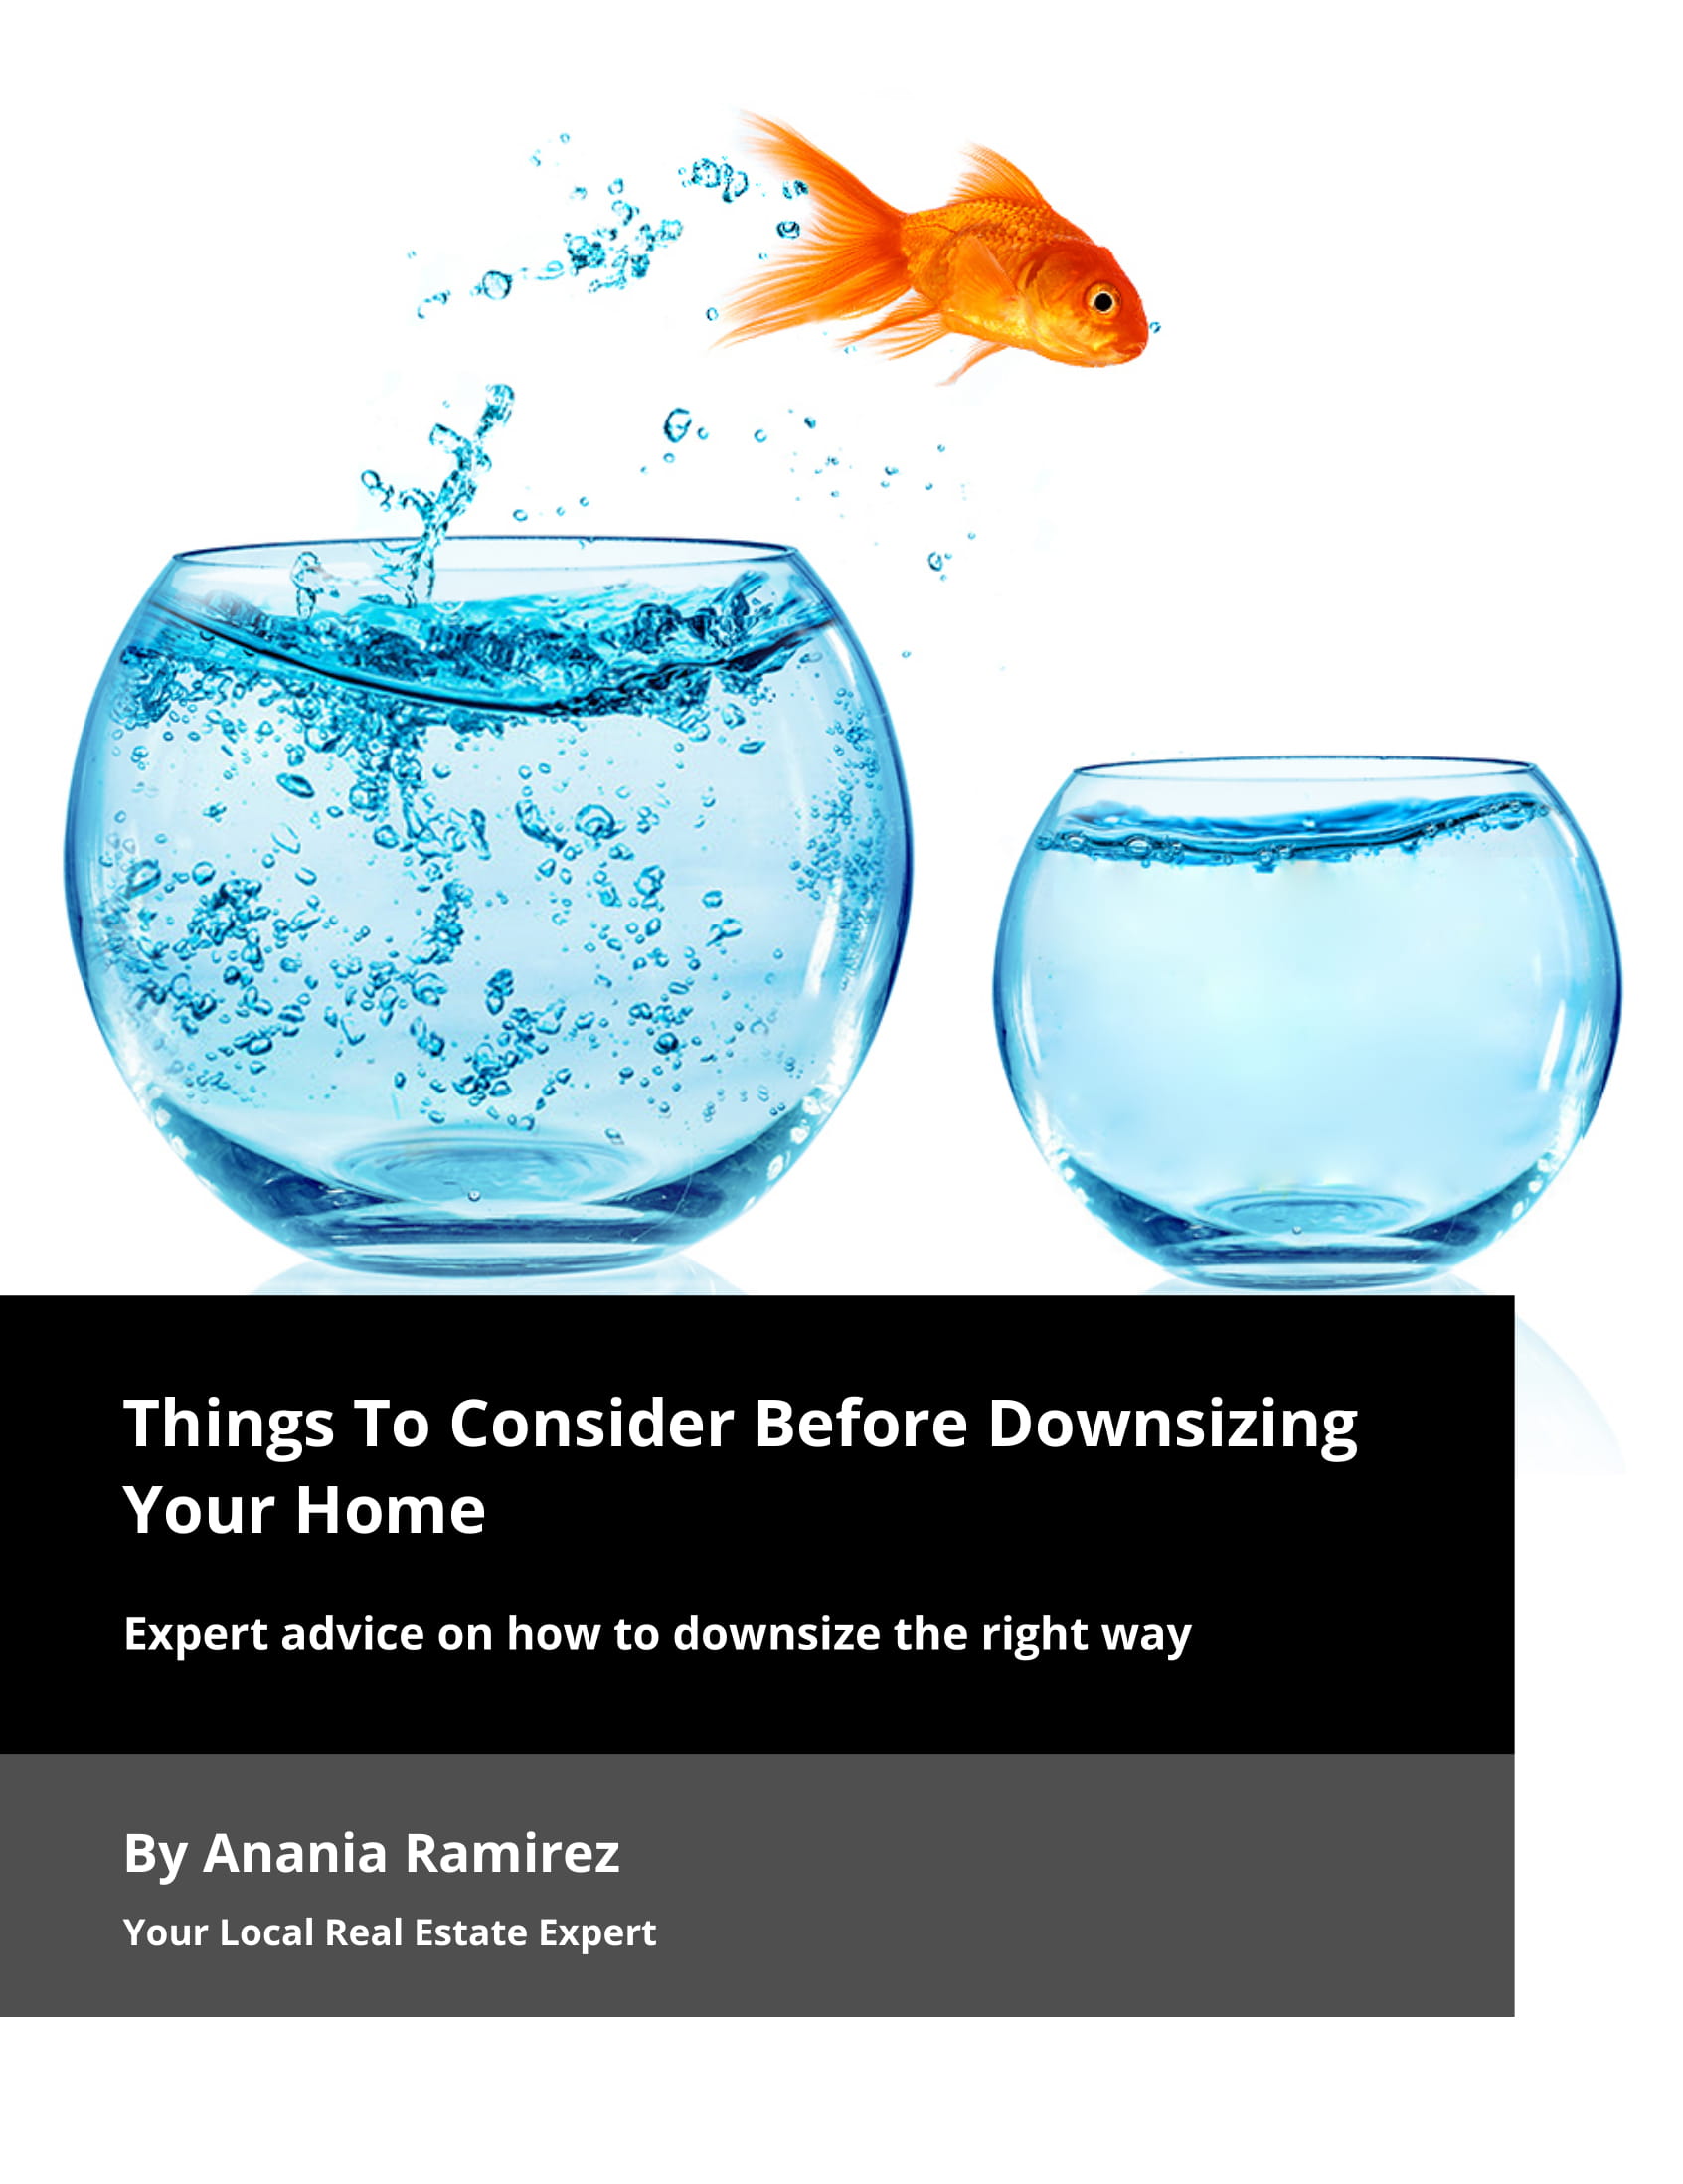 Things To Consider Before Downsizing Your Home